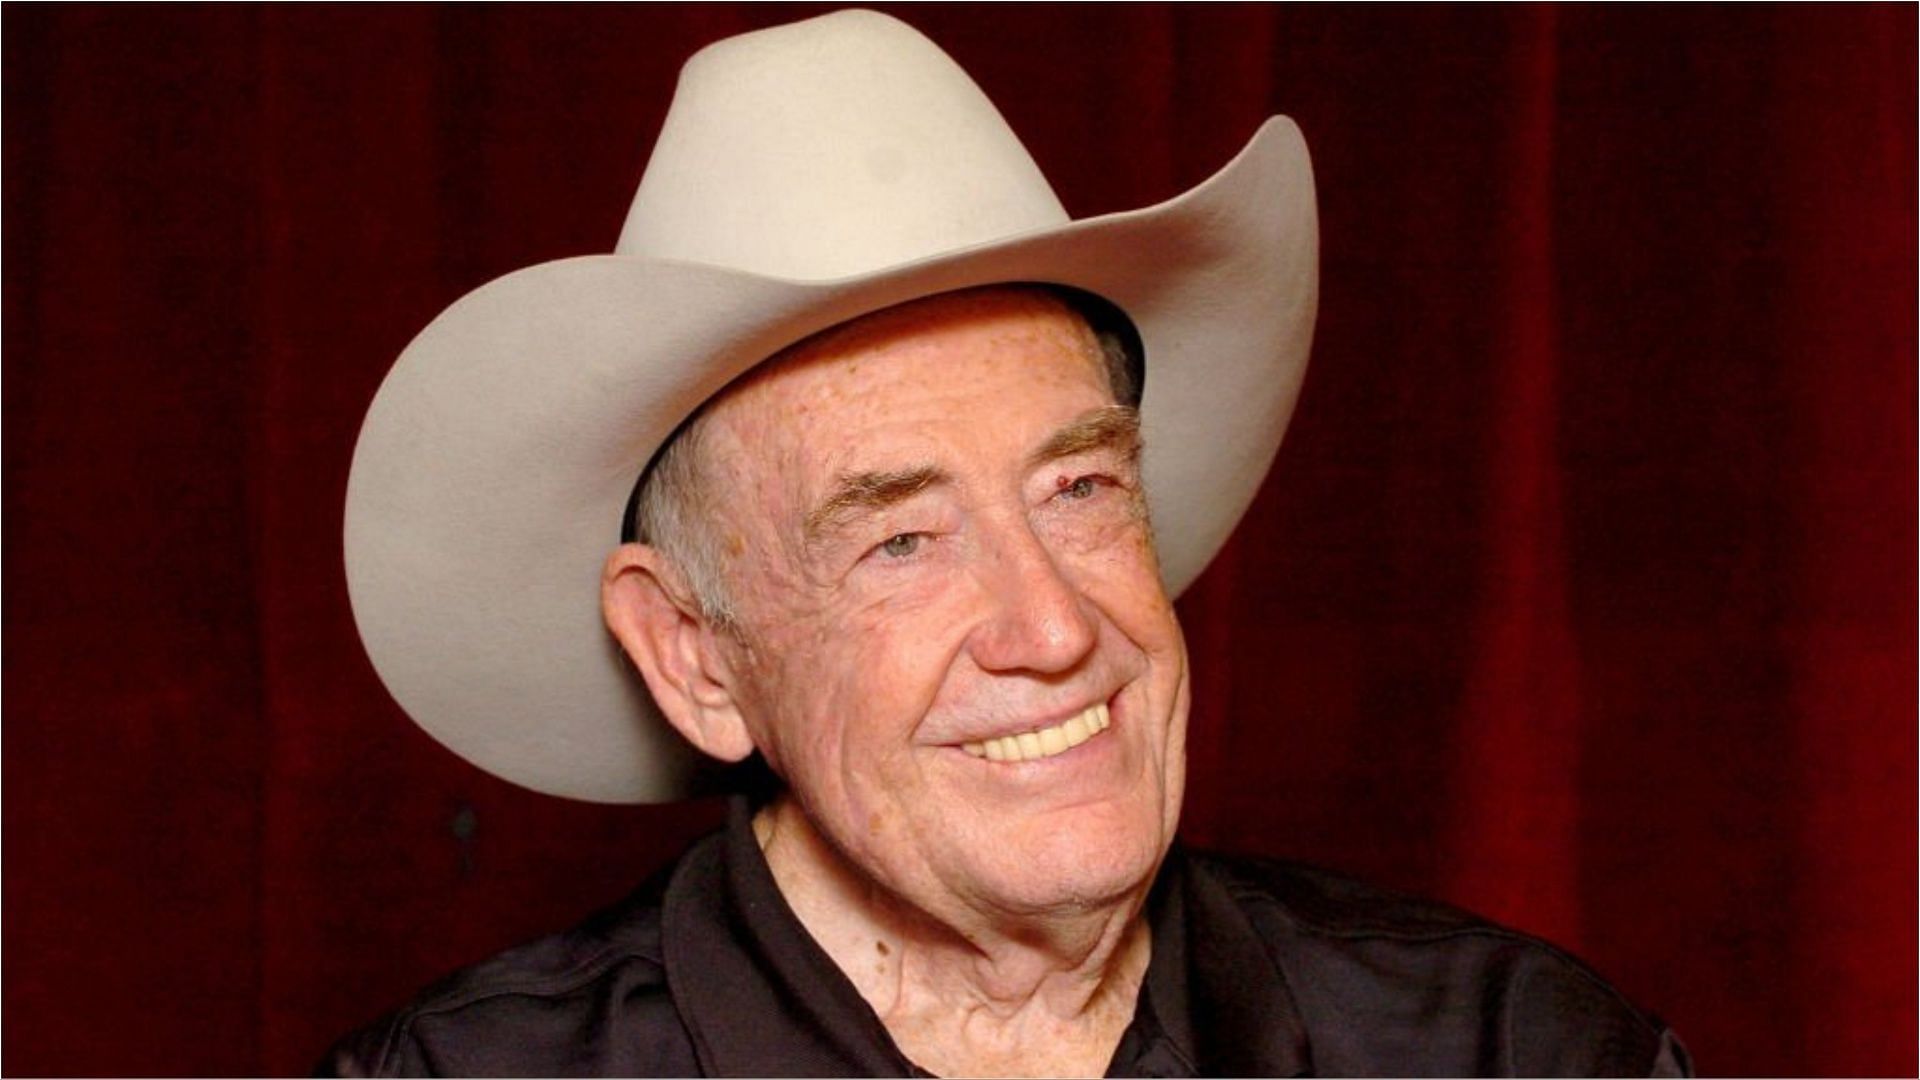 Doyle Brunson accumulated a lot of wealth from his career as a poker player (Image via David Lodge/Getty Images)